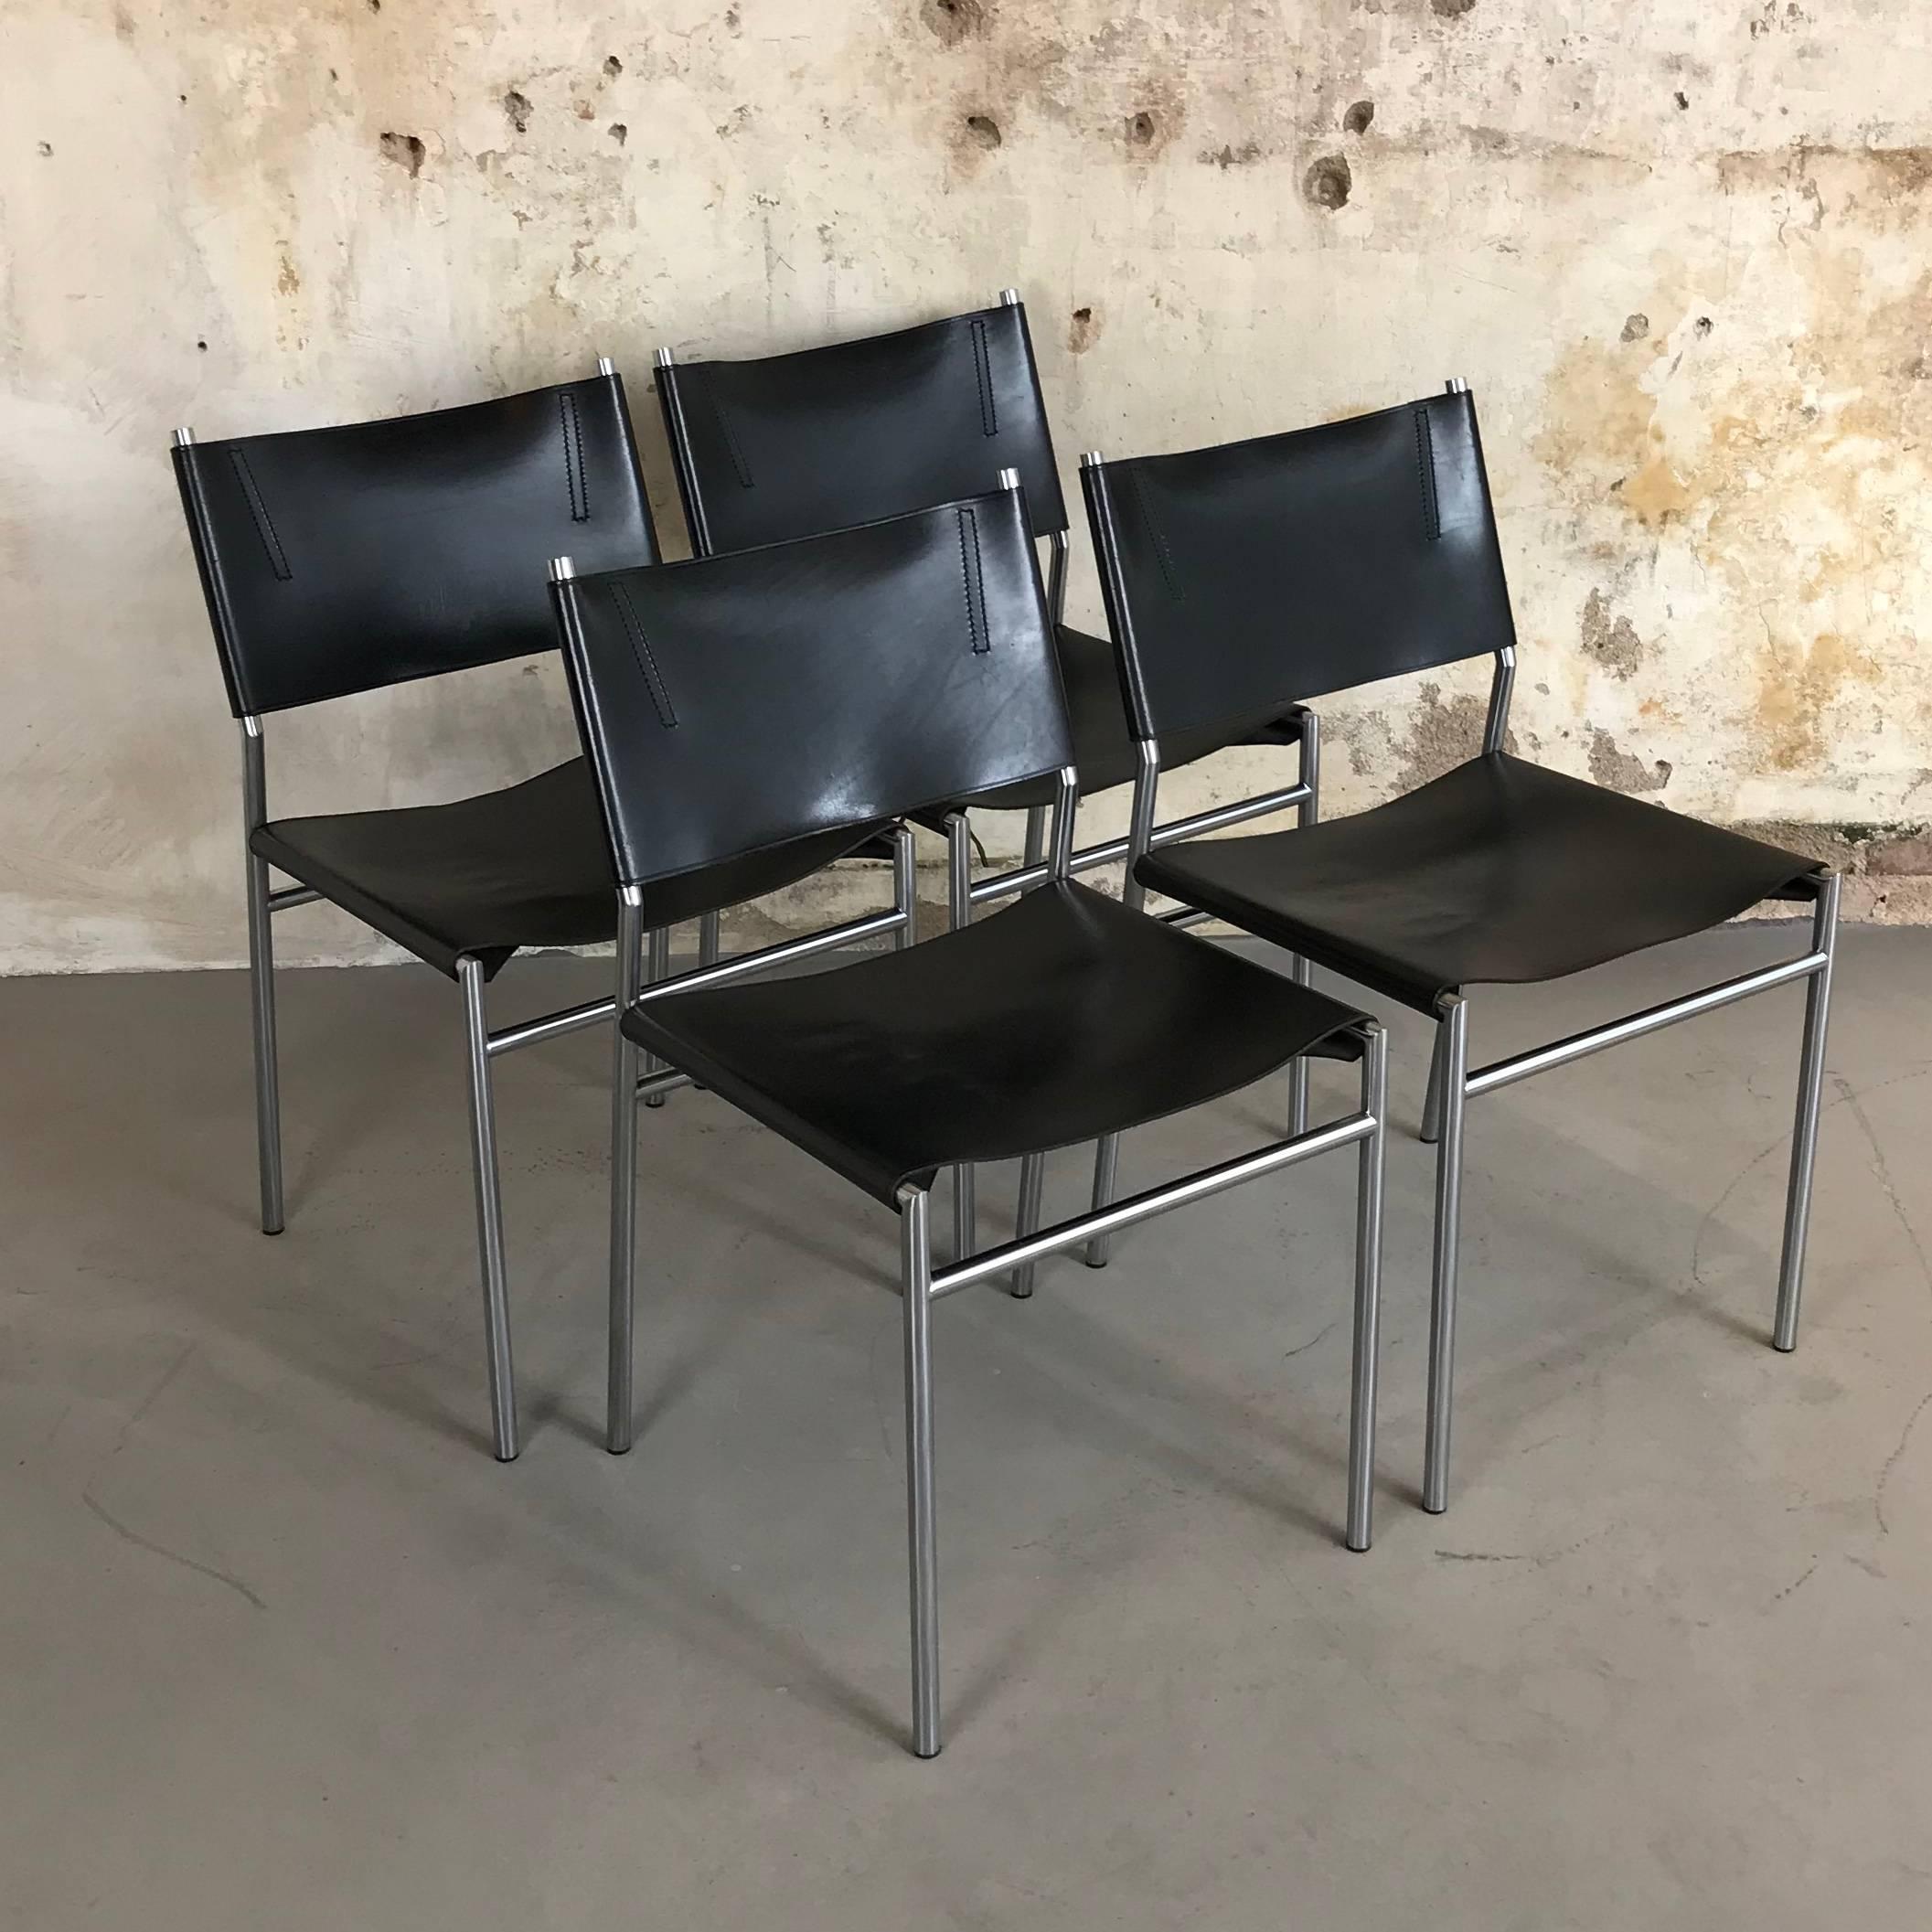 Set of four SE06 chairs designed in 1960 by Dutch designer Martin Visser for ’t Spectrum (The Netherlands). The chairs are upholstered with beautiful patinated saddle leather. The frames are made of tubular brushed steel.
Early versions in a good